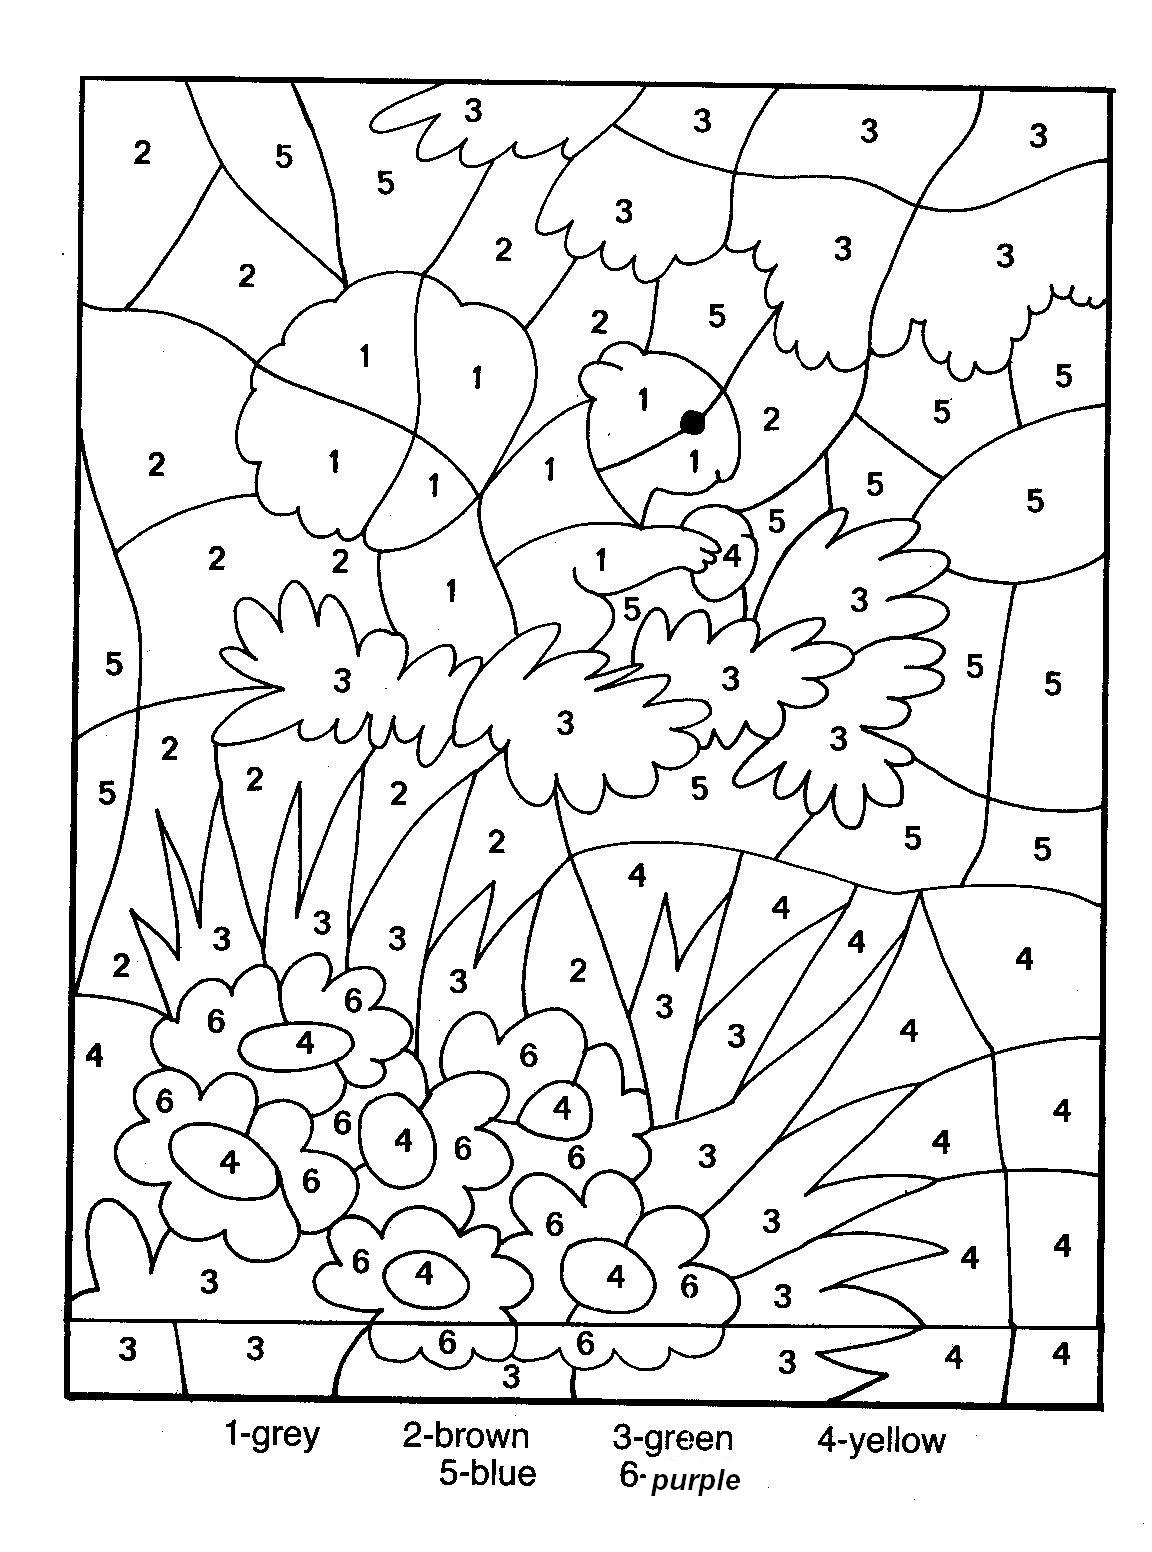 There's a squirrel in this magical coloring page ! let's find it :)